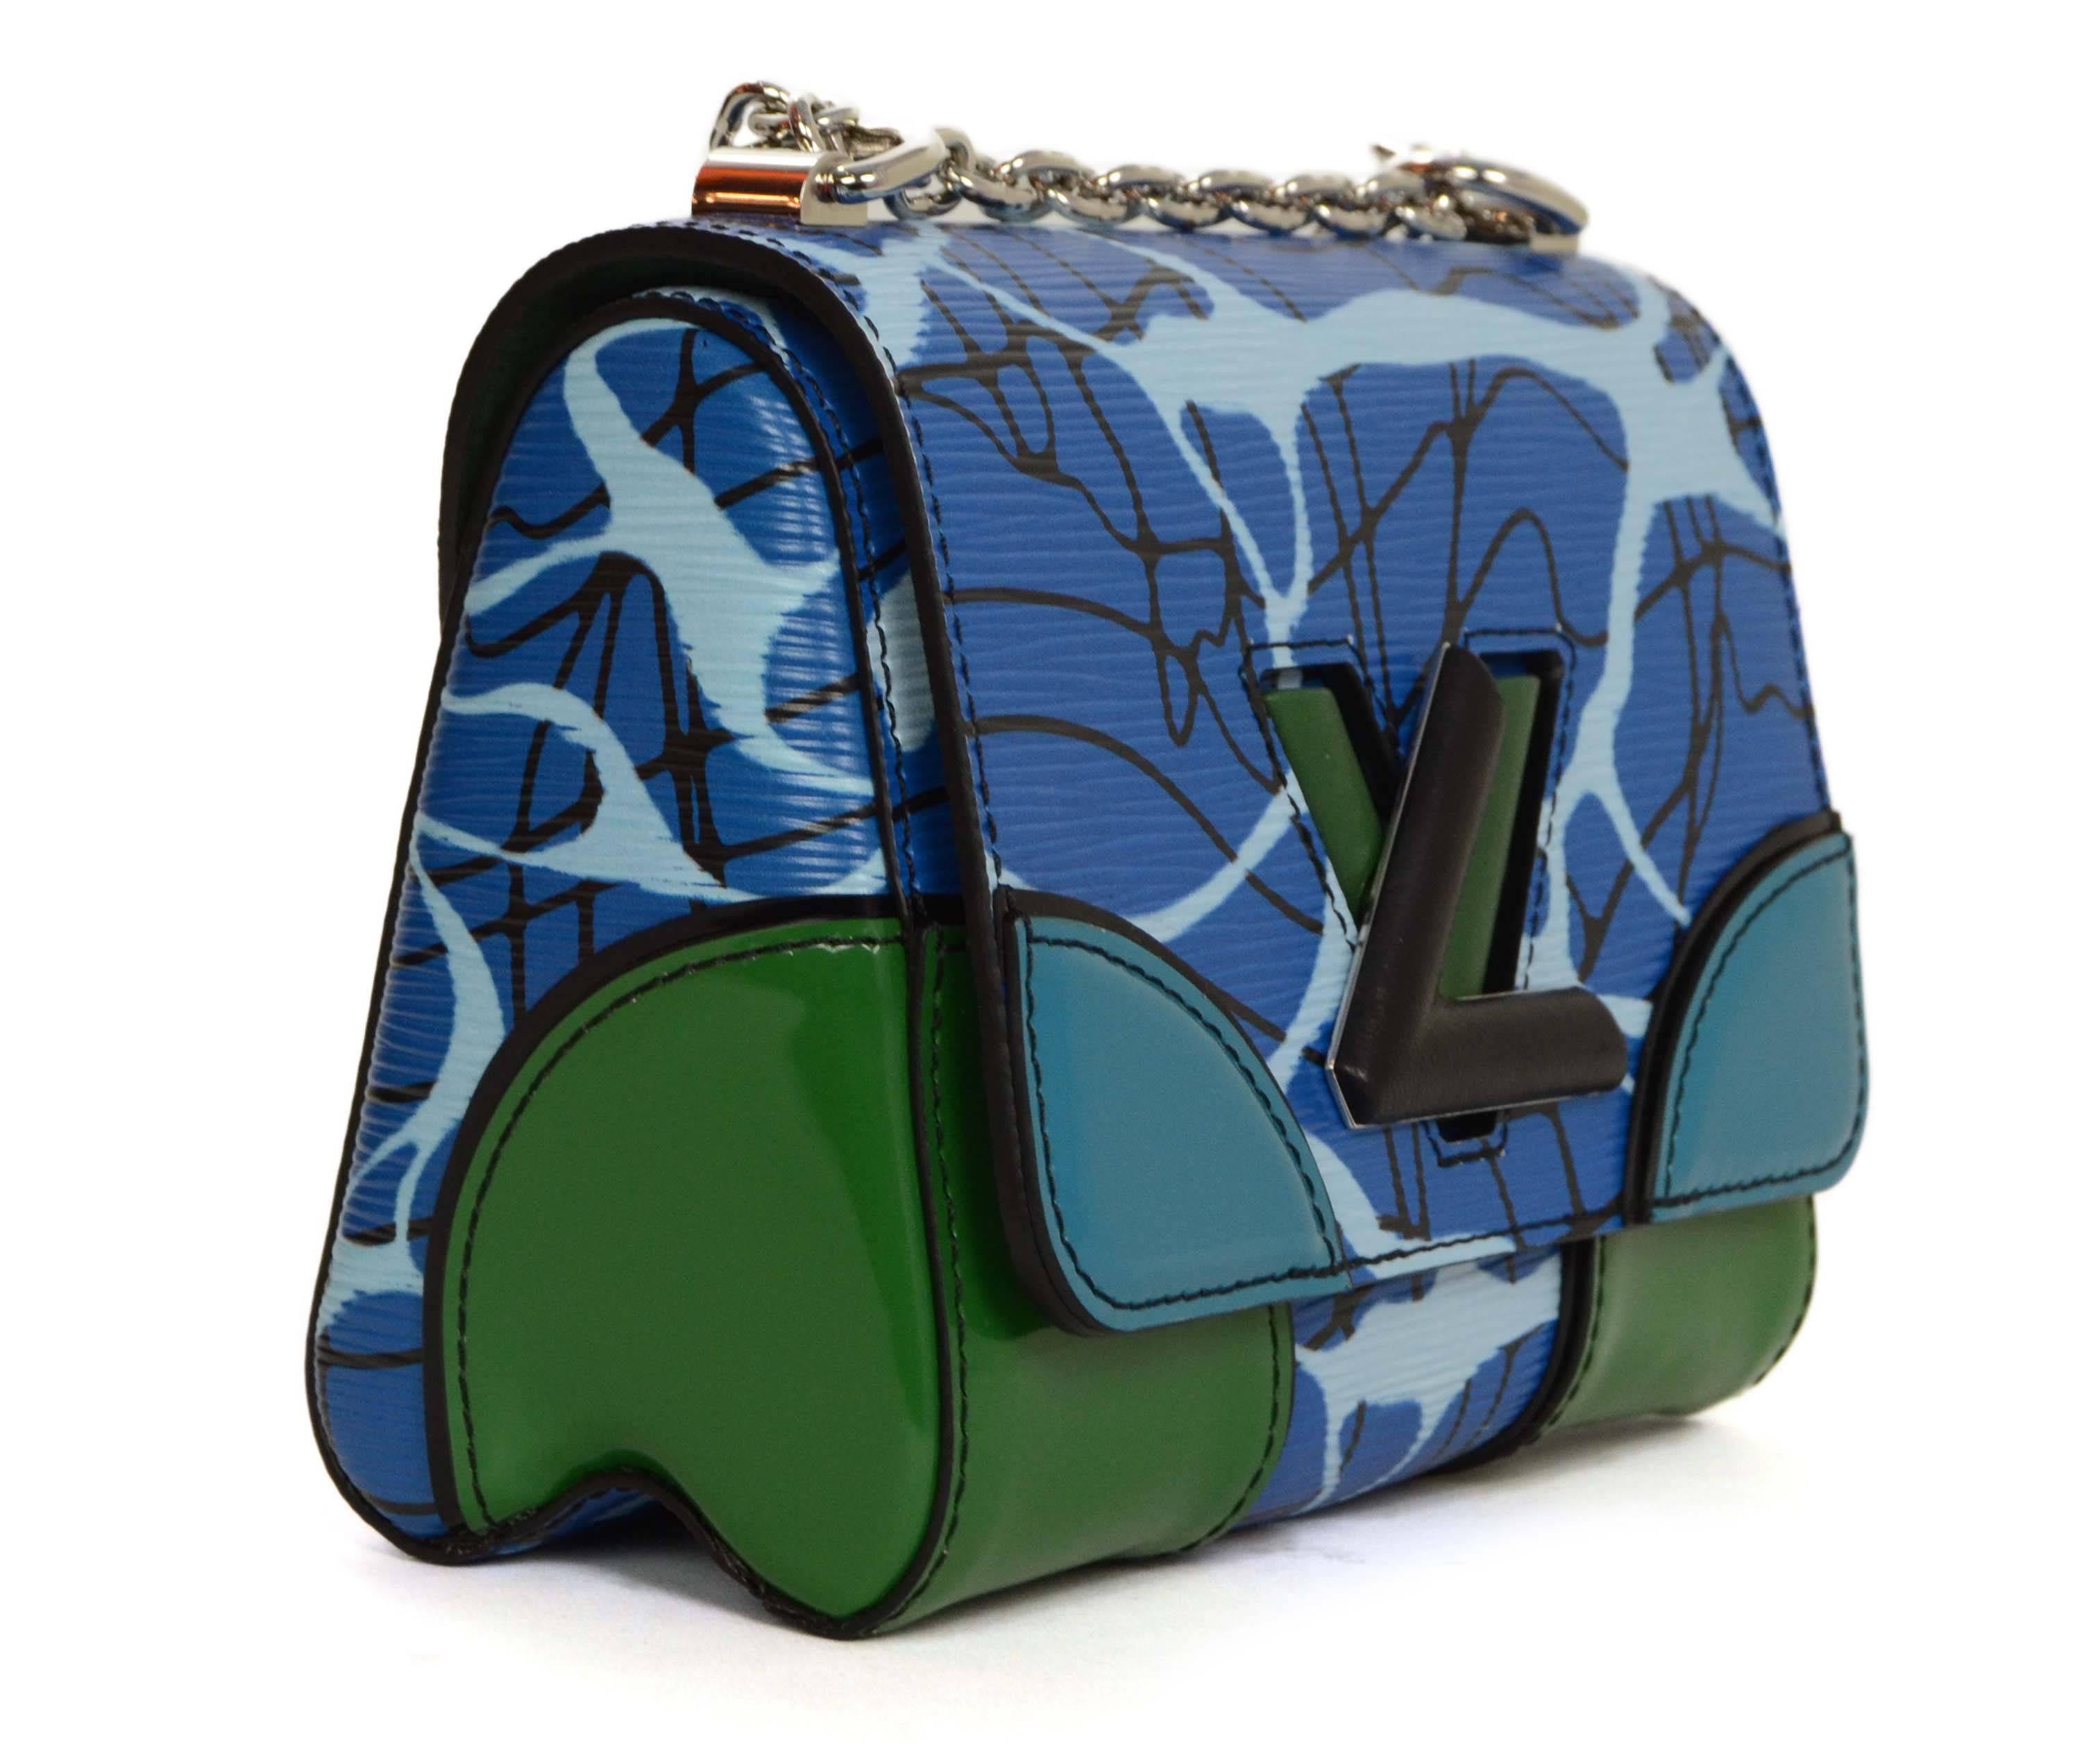 Louis Vuitton '15 Epi Aquatic Print Twist PM Bag 
Features black and pale blue details printed throughout
Made In: France
Year of Production: 2015
Color: Blue, black, and green
Hardware: Silvertone
Materials: Epi leather and metal
Lining: